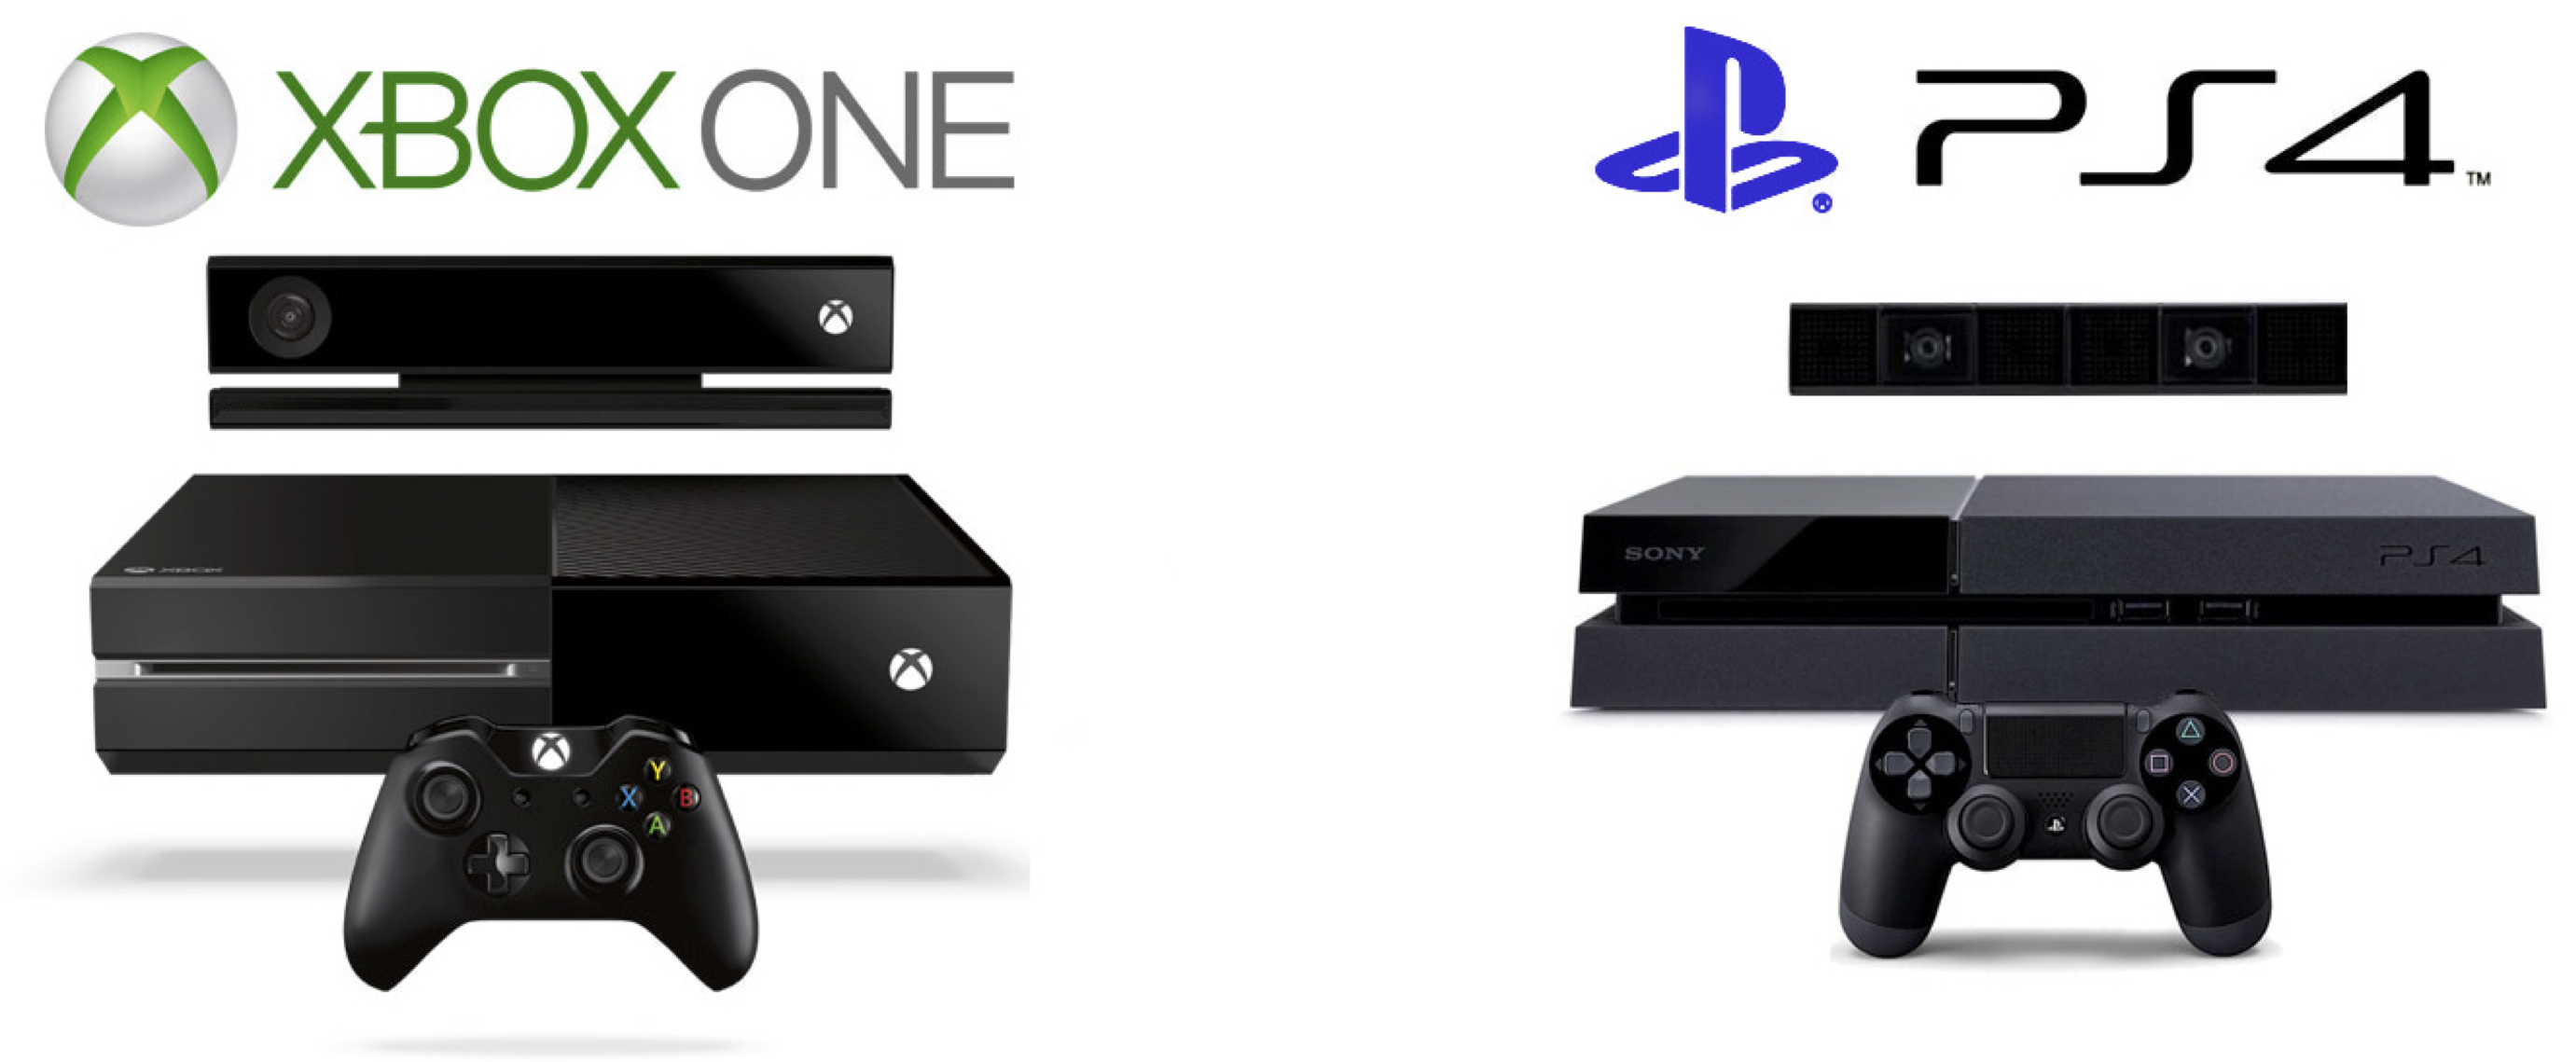 ps4 vs xbox one size